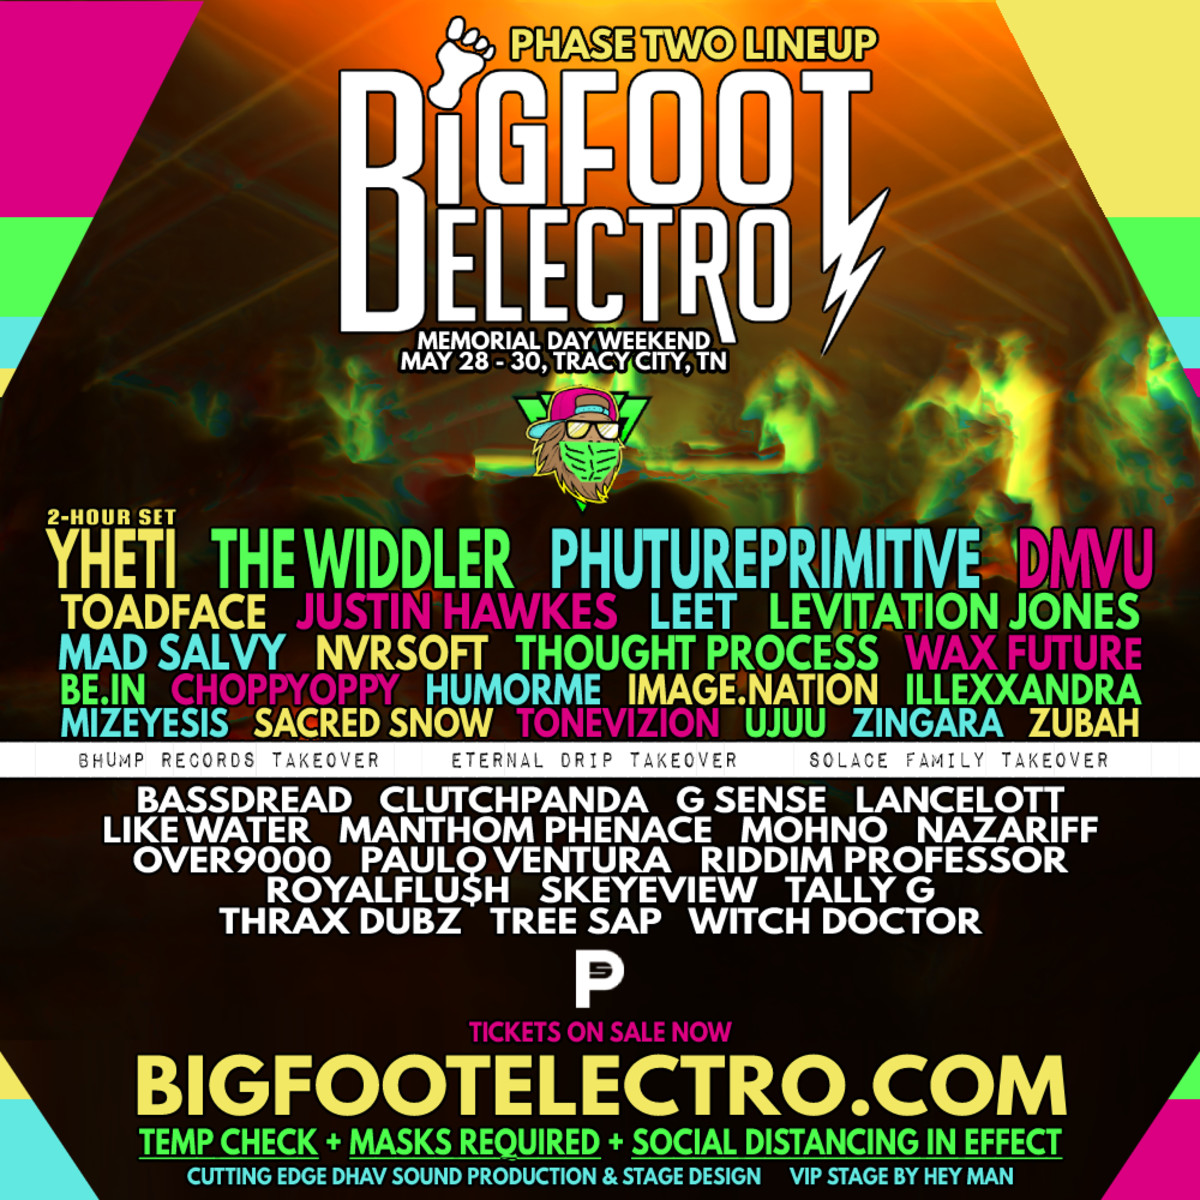 Phase Two lineup for Bigfoot Electro 2021.